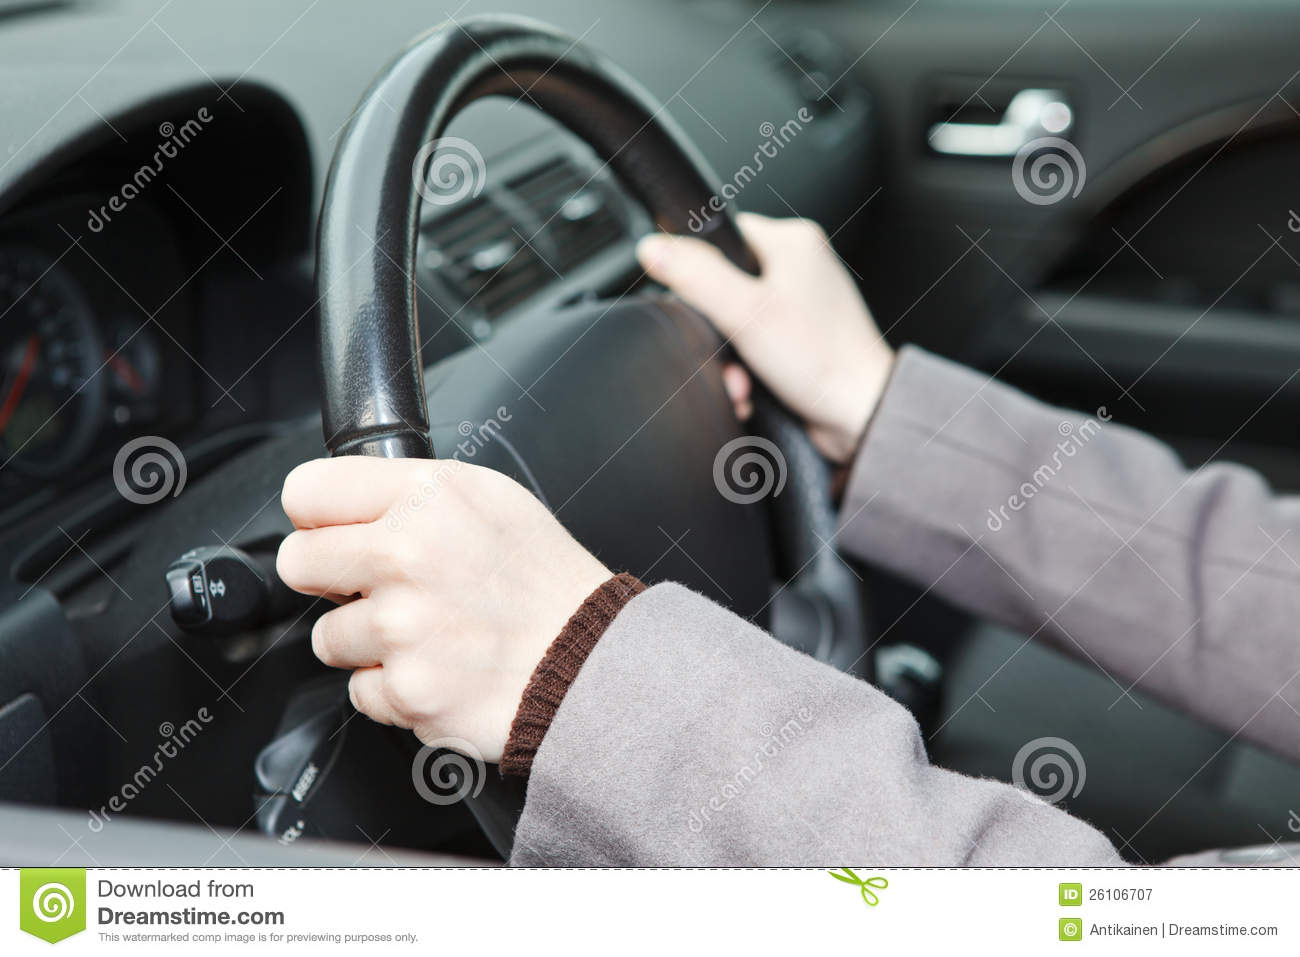 Right Hands Position On Steering Wheel Royalty Free Stock Photography